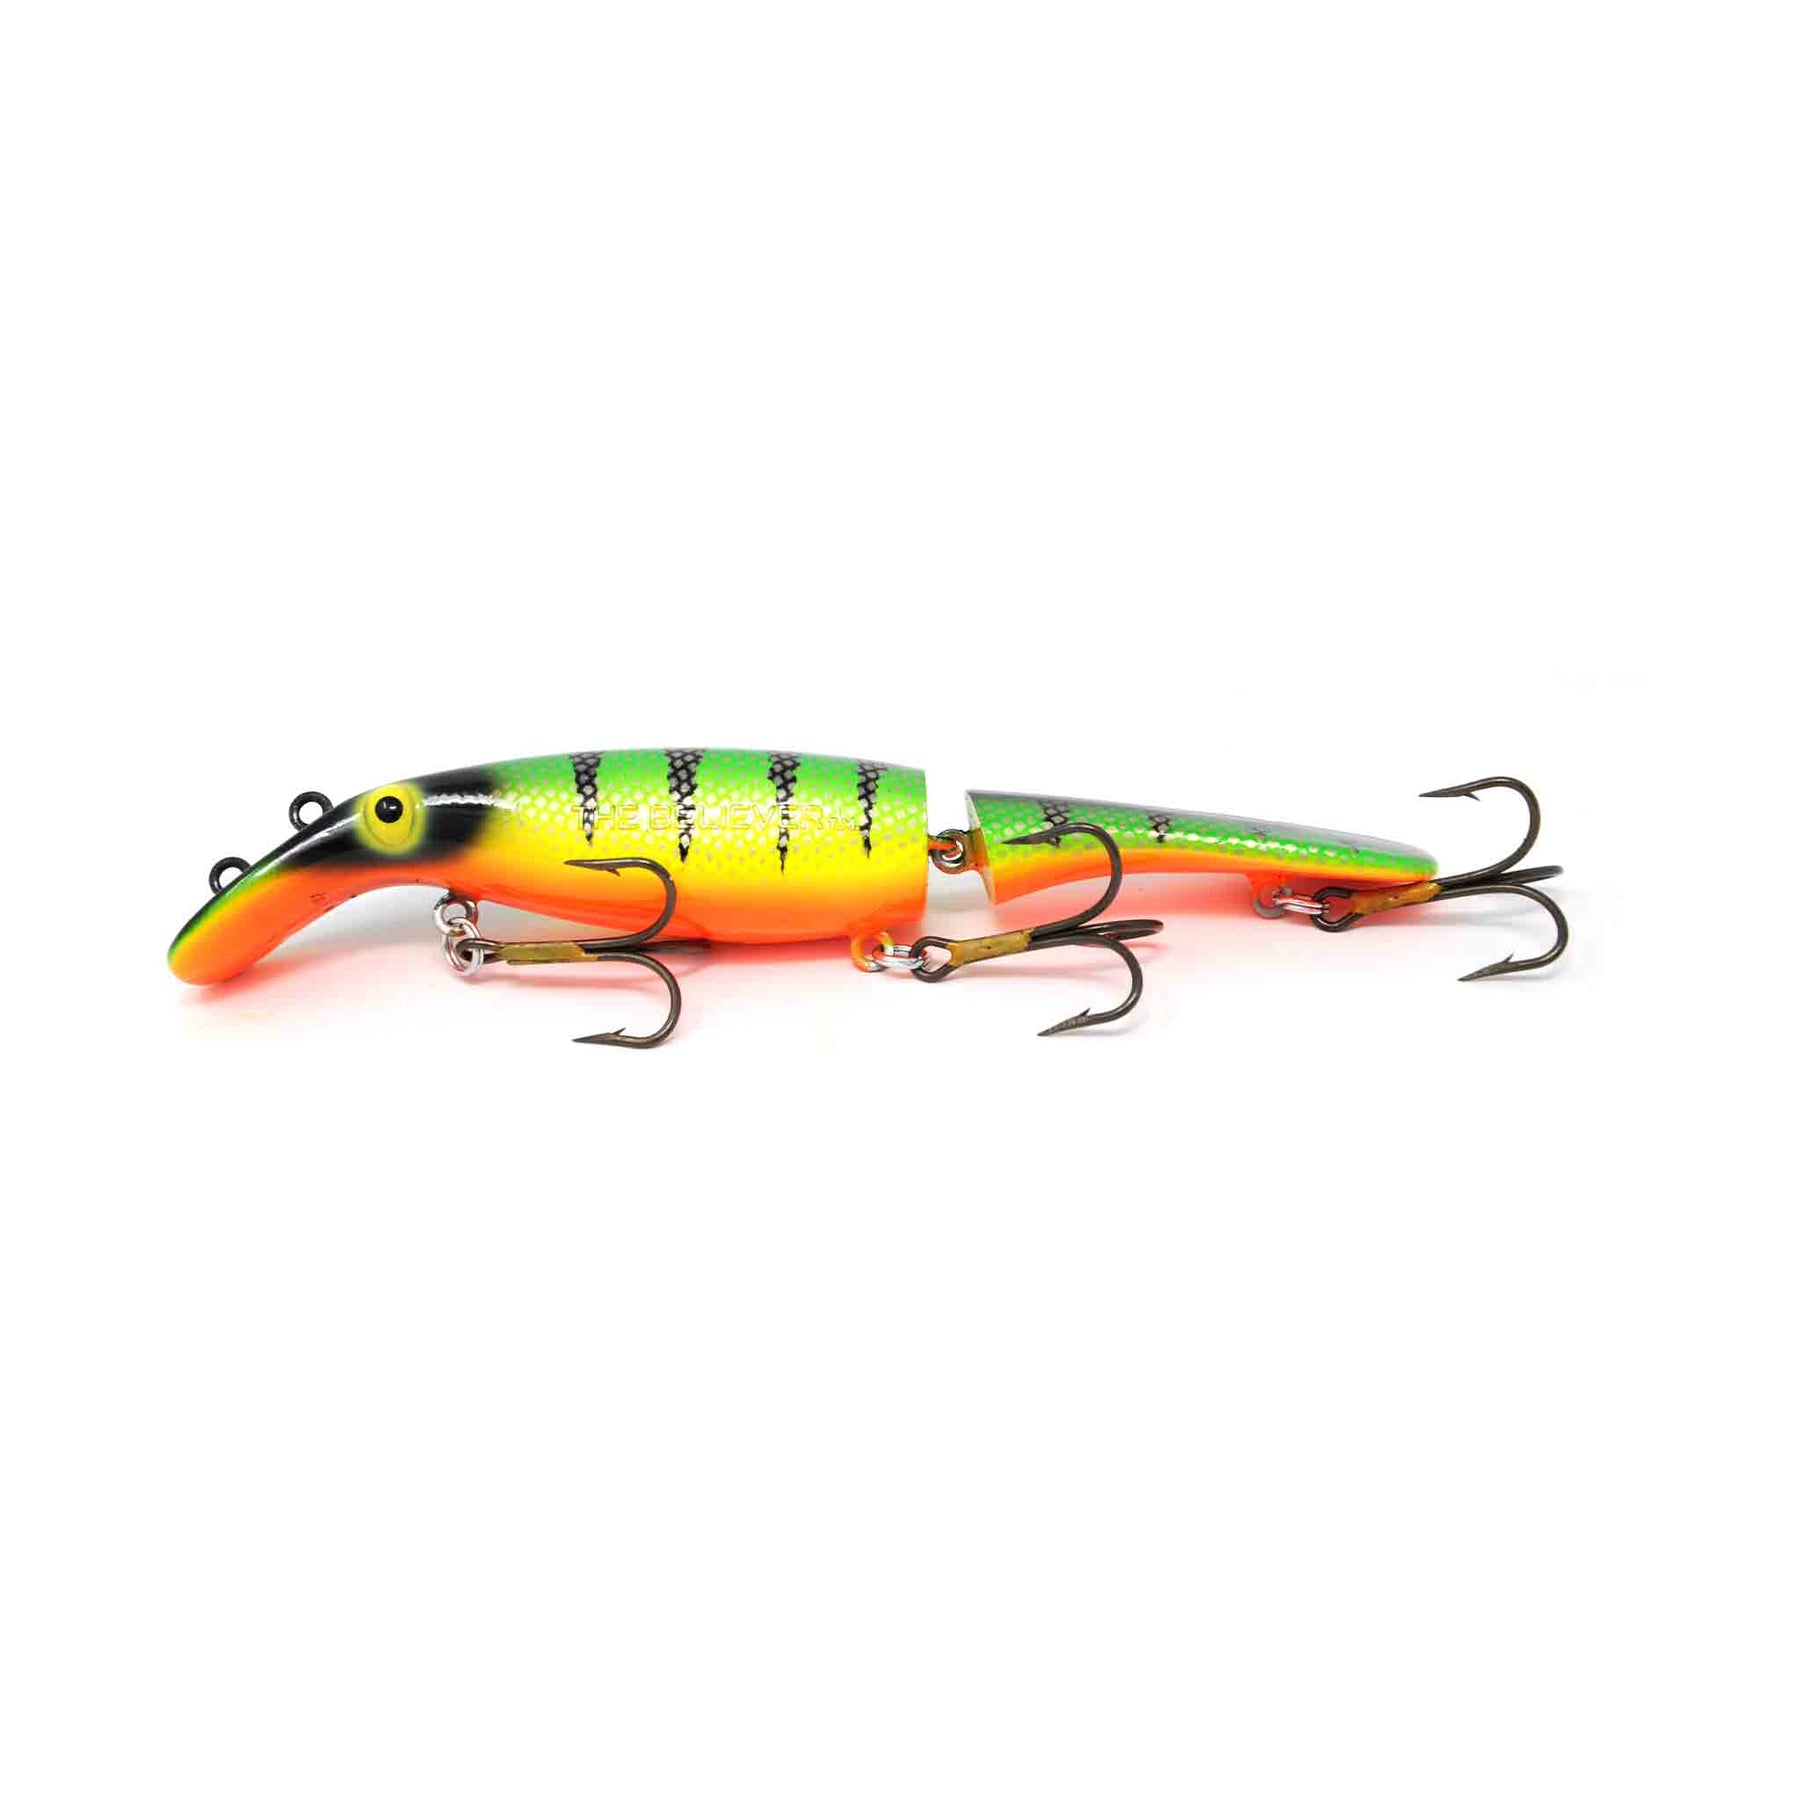 Drifter Tackle Believer Jointed 8 Crankbait